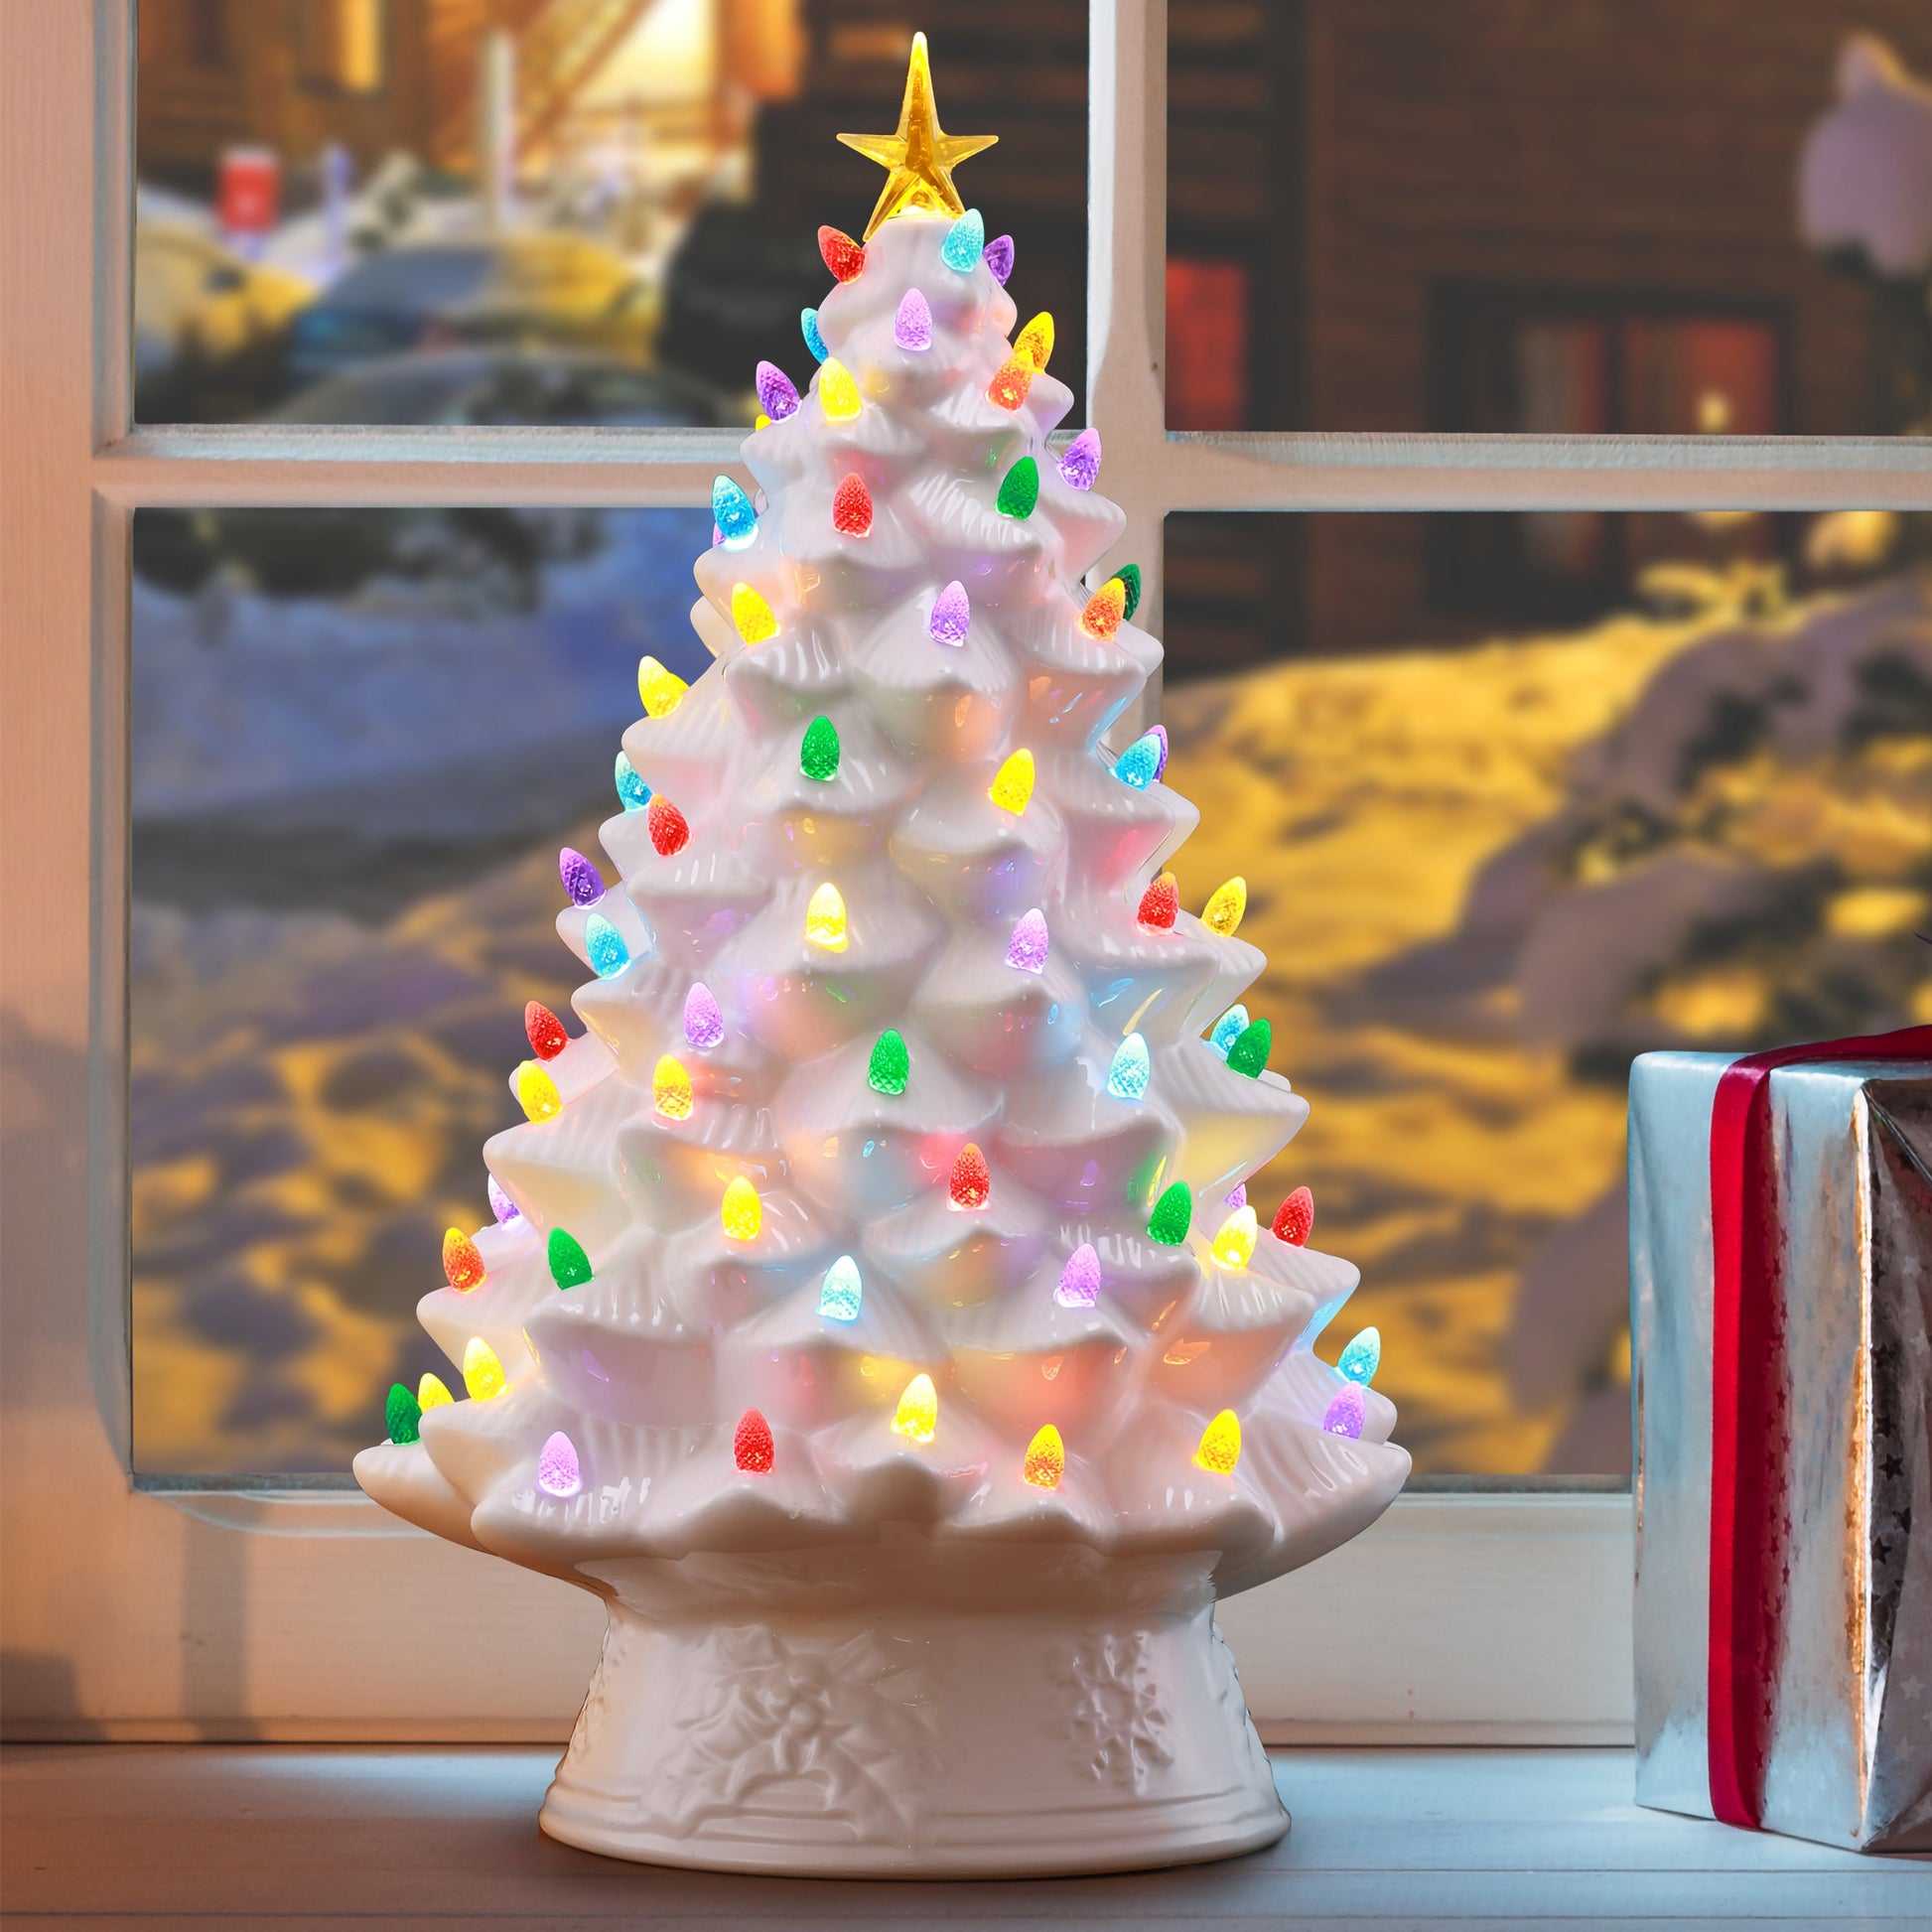 9 Ceramic Christmas Trees That Light Up - Vintage Ceramic Tabletop  Christmas Tree, Porcelain Magical Christmas Tree with 44 Multicolored  Lights for